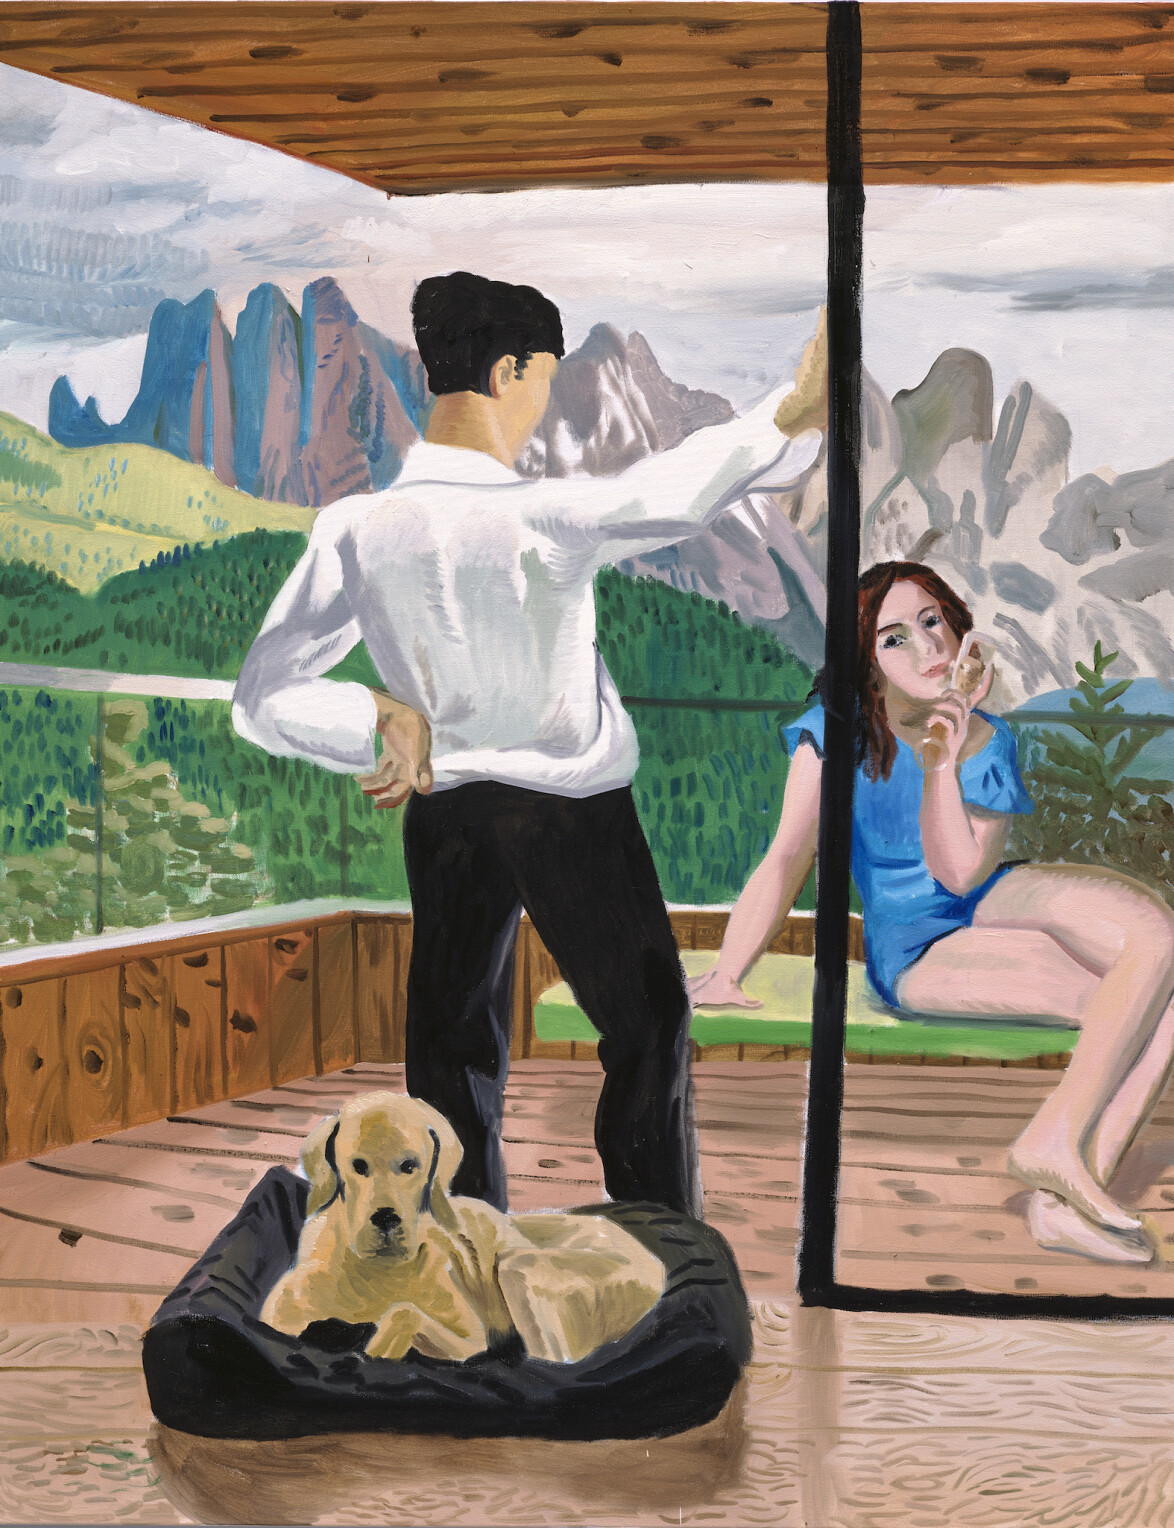 YANG Lee 
Babe, Do You Enjoy This Place?
2022
Oil on canvas
162×130cm